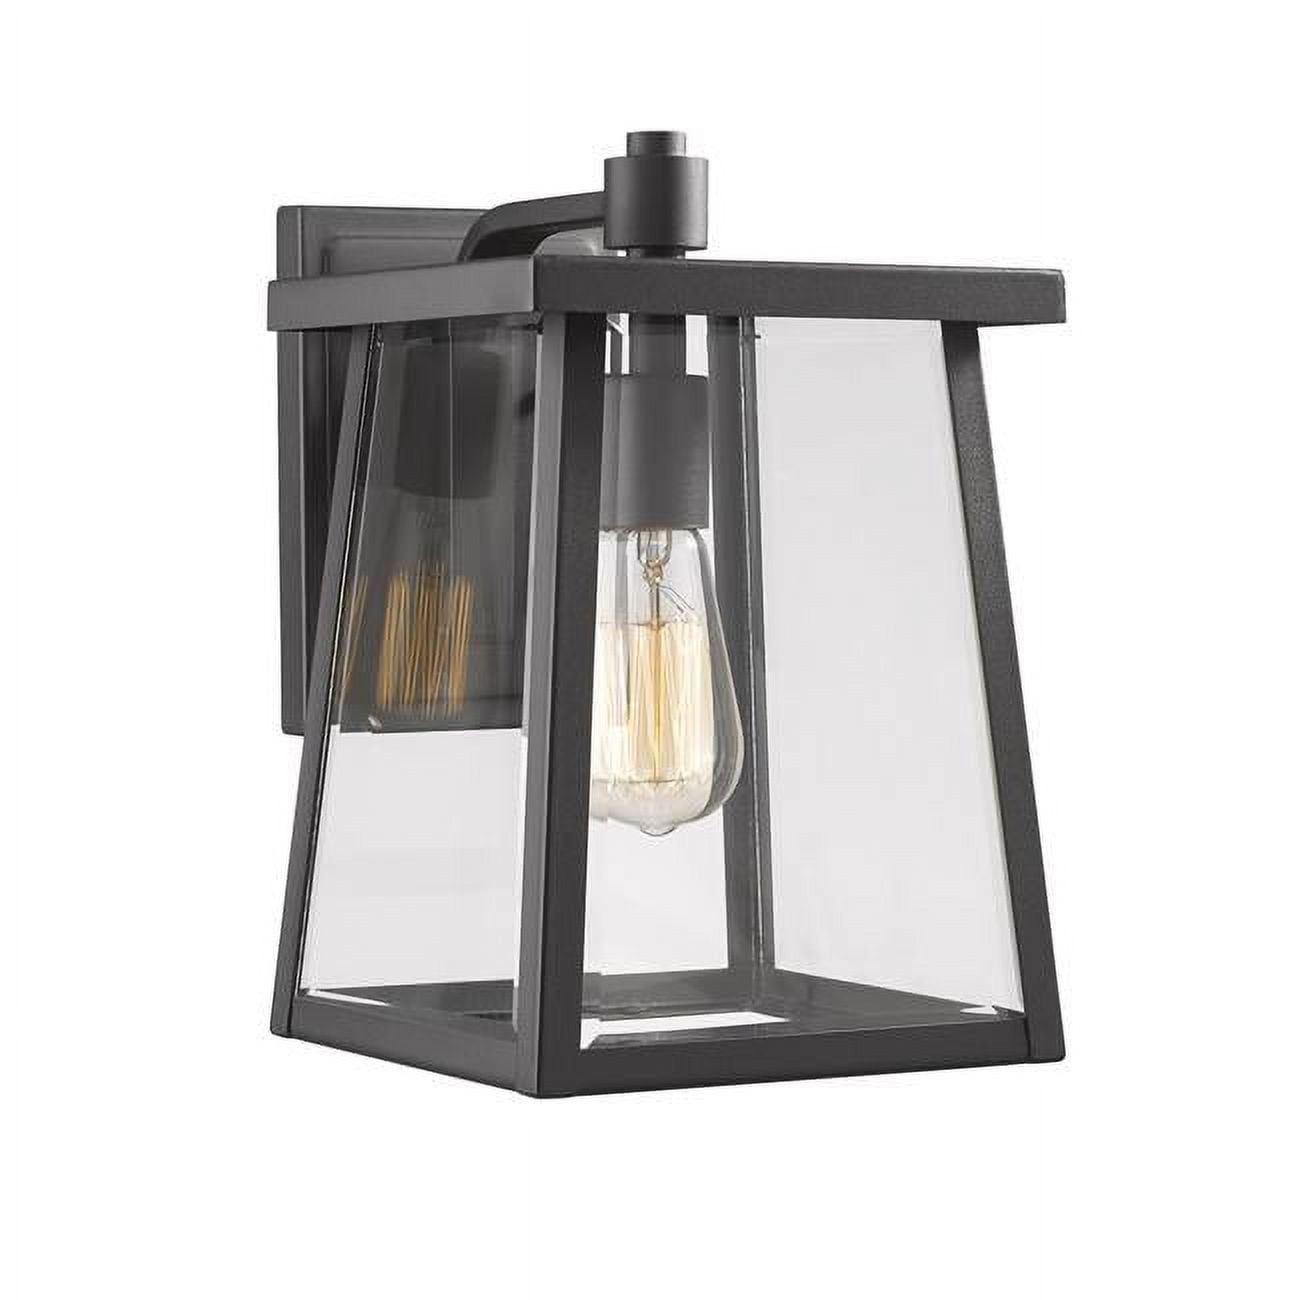 Ch2s079bk12-od1 Gabriel Transitional 1 Light Textured Black Outdoor Wall Sconce - 12 In.